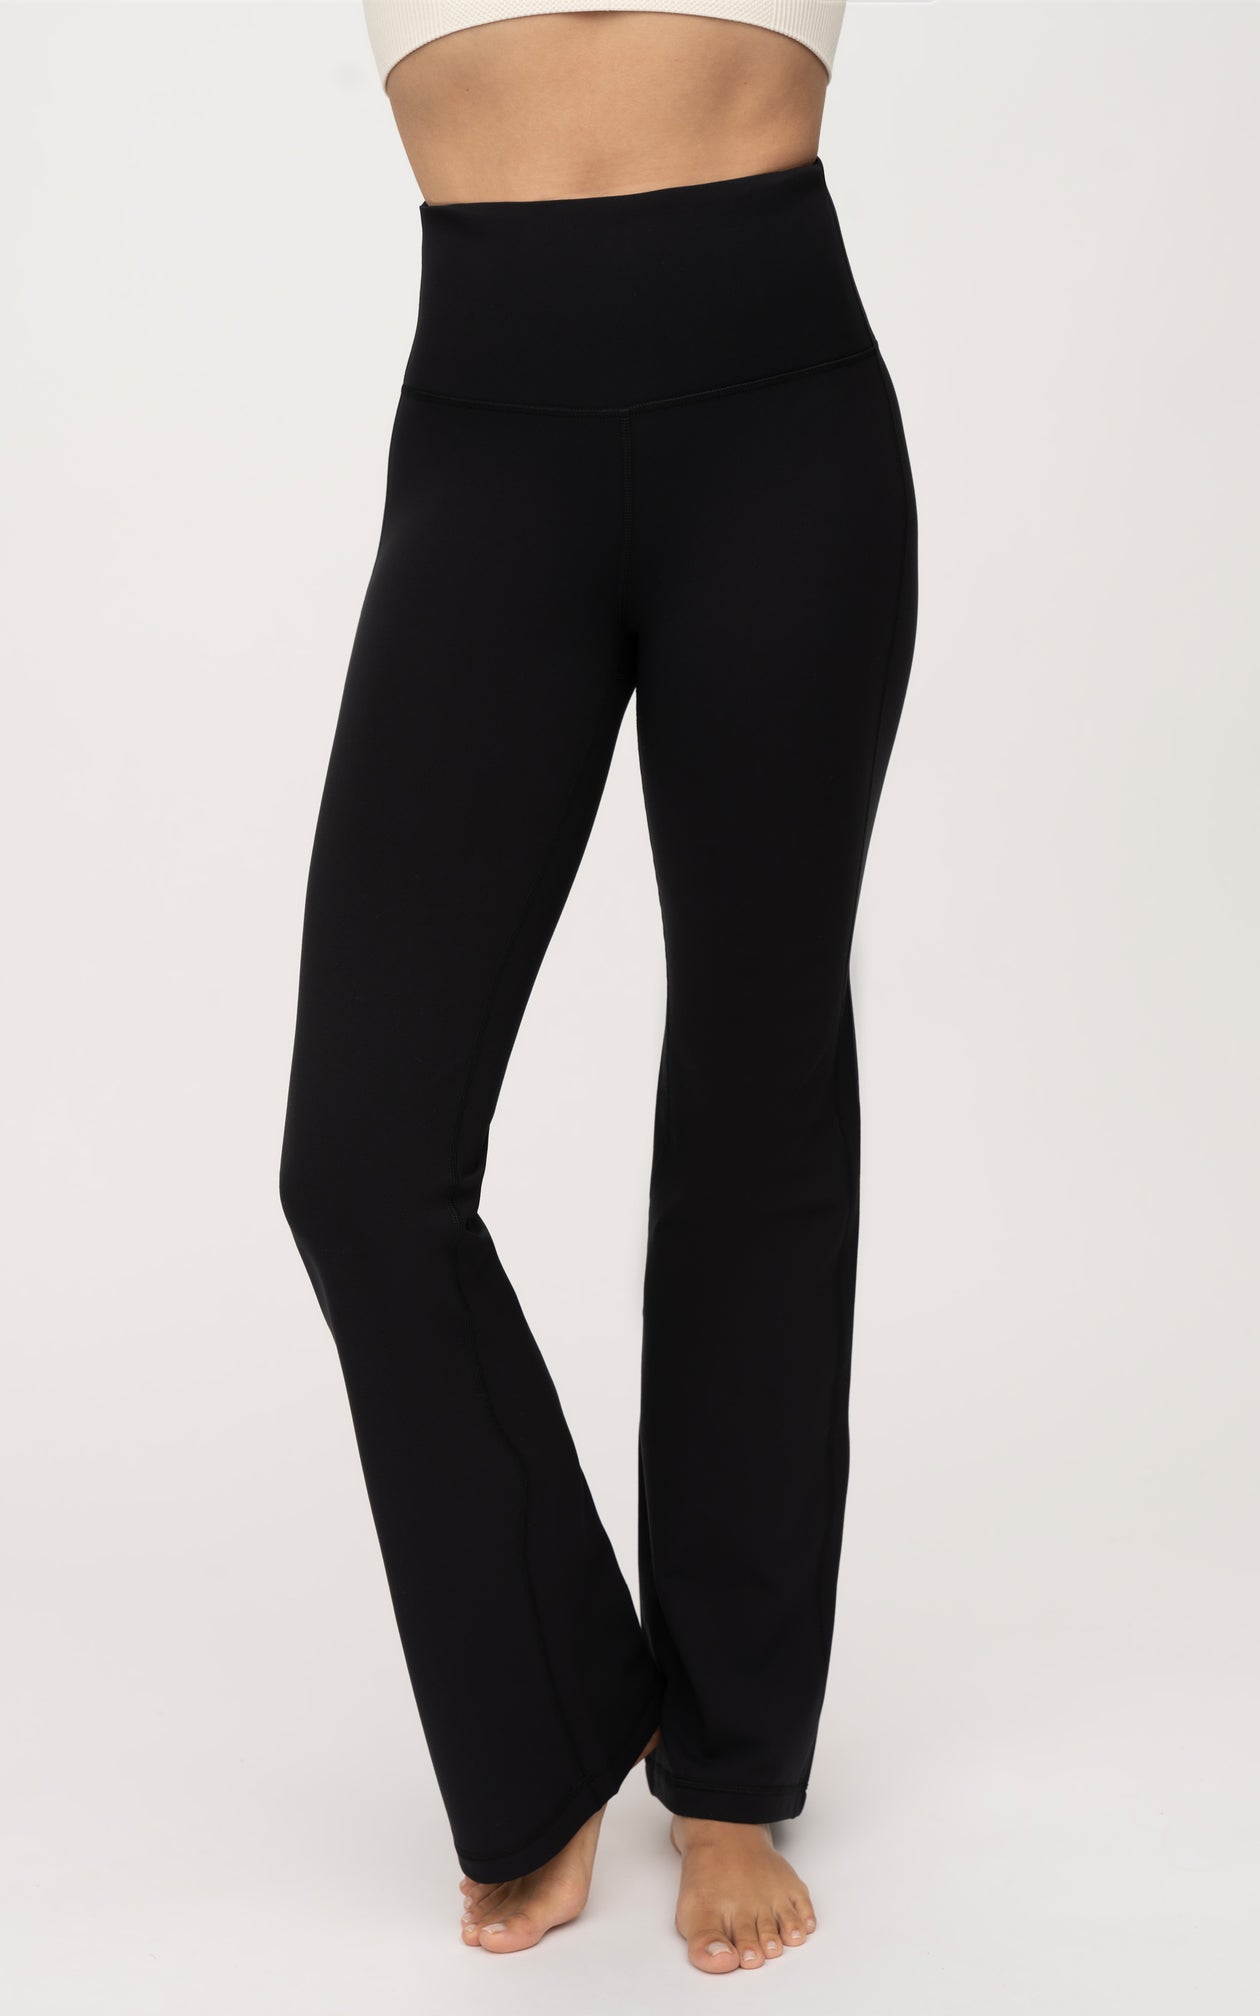 Dreamlux Flared Leggings with Zippered Pockets 29.5 / 31.5 Inseam -  29.5'' / Dark Carbon / XS